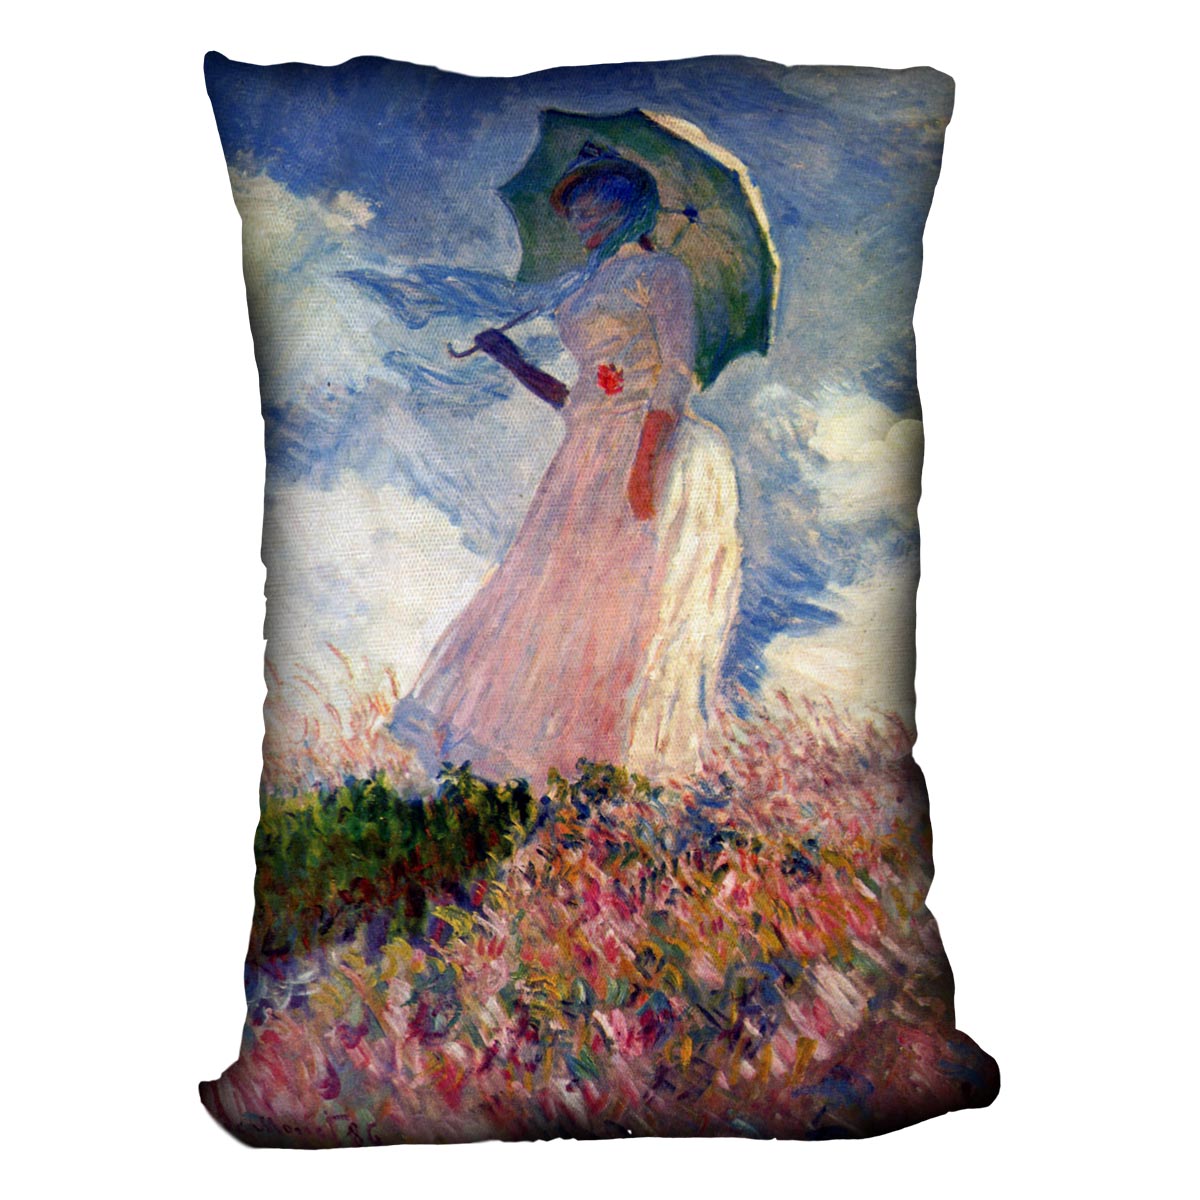 Woman with Parasol study by Monet Cushion